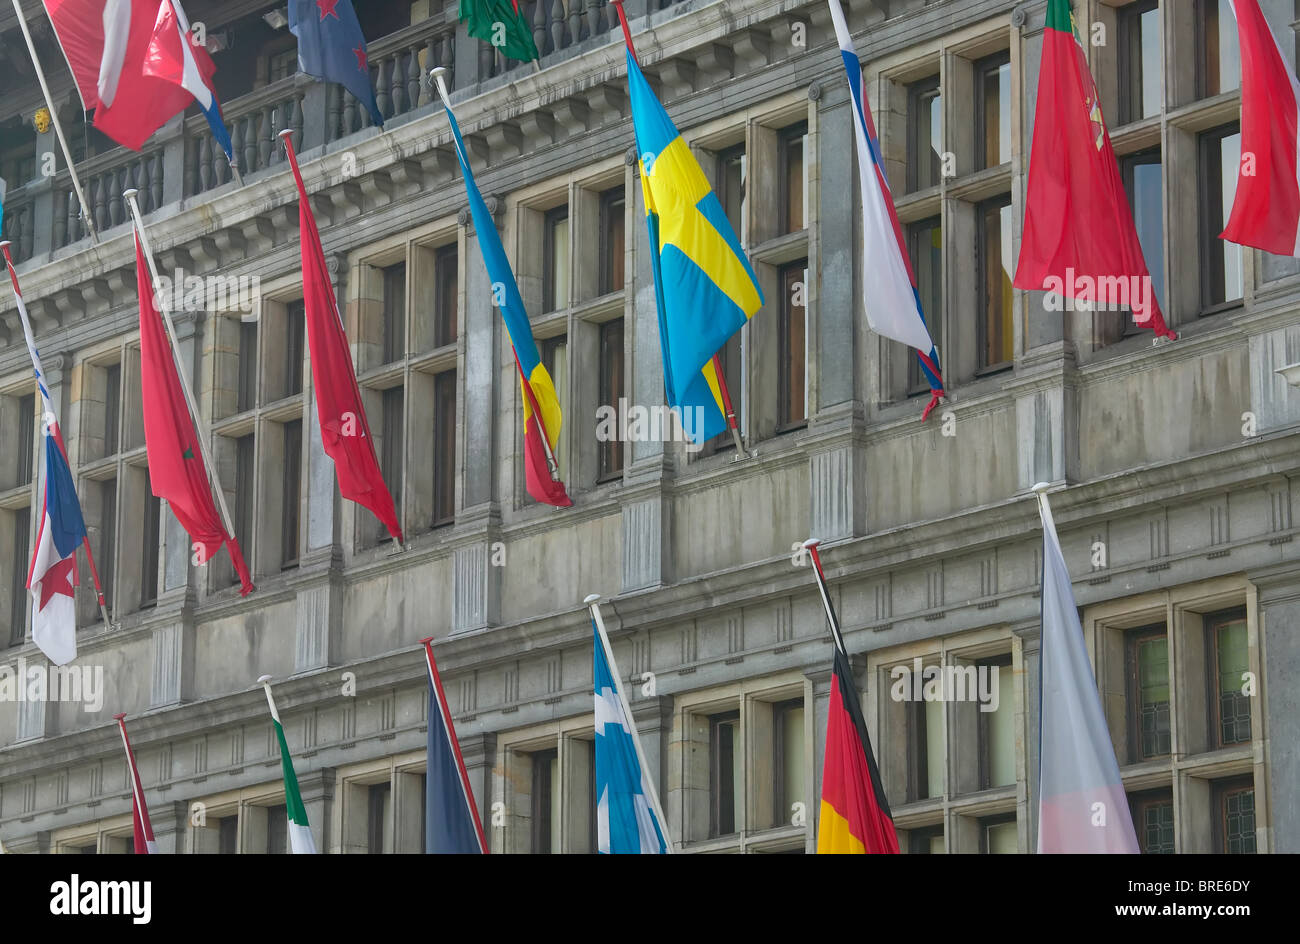 A few of the many flags of nations on the exterior of the Town Hall of Antwerp in Grote Markt, Antwerp, Belgium Stock Photo